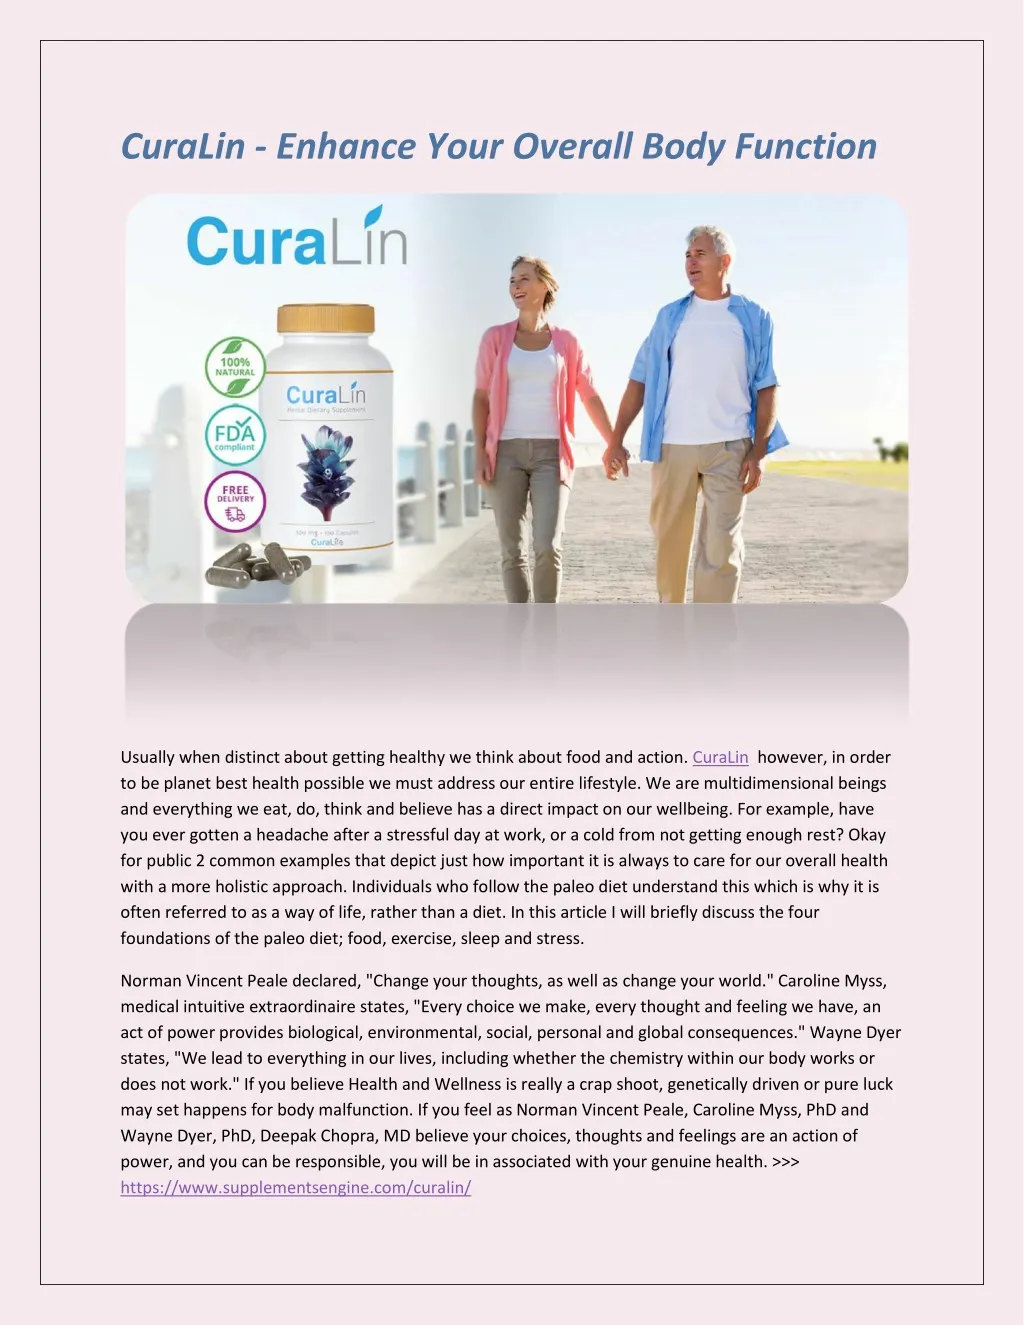 curalin enhance your overall body function